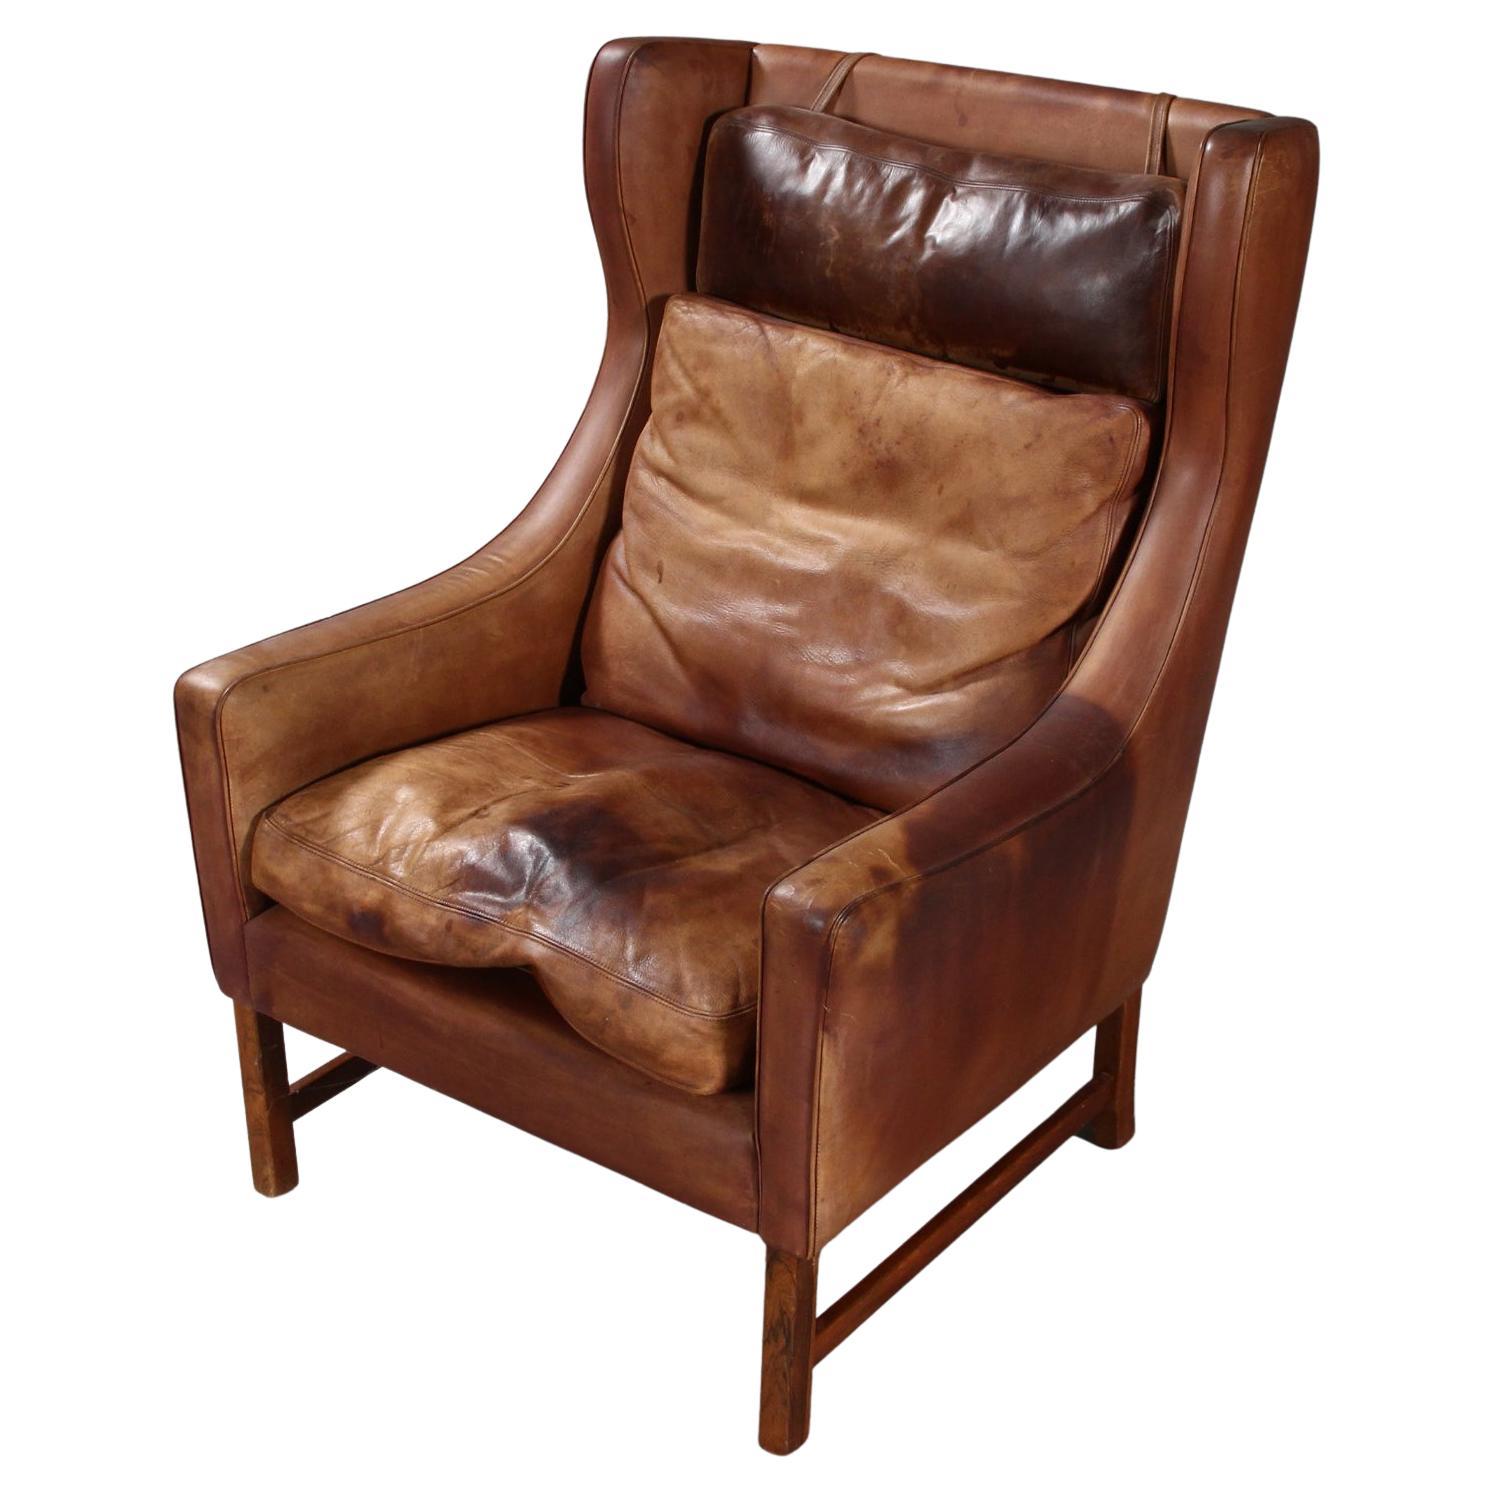 Frederik A. Kayser Wingback Chair Upholstered in Cognac-Ccolored Leather For Sale